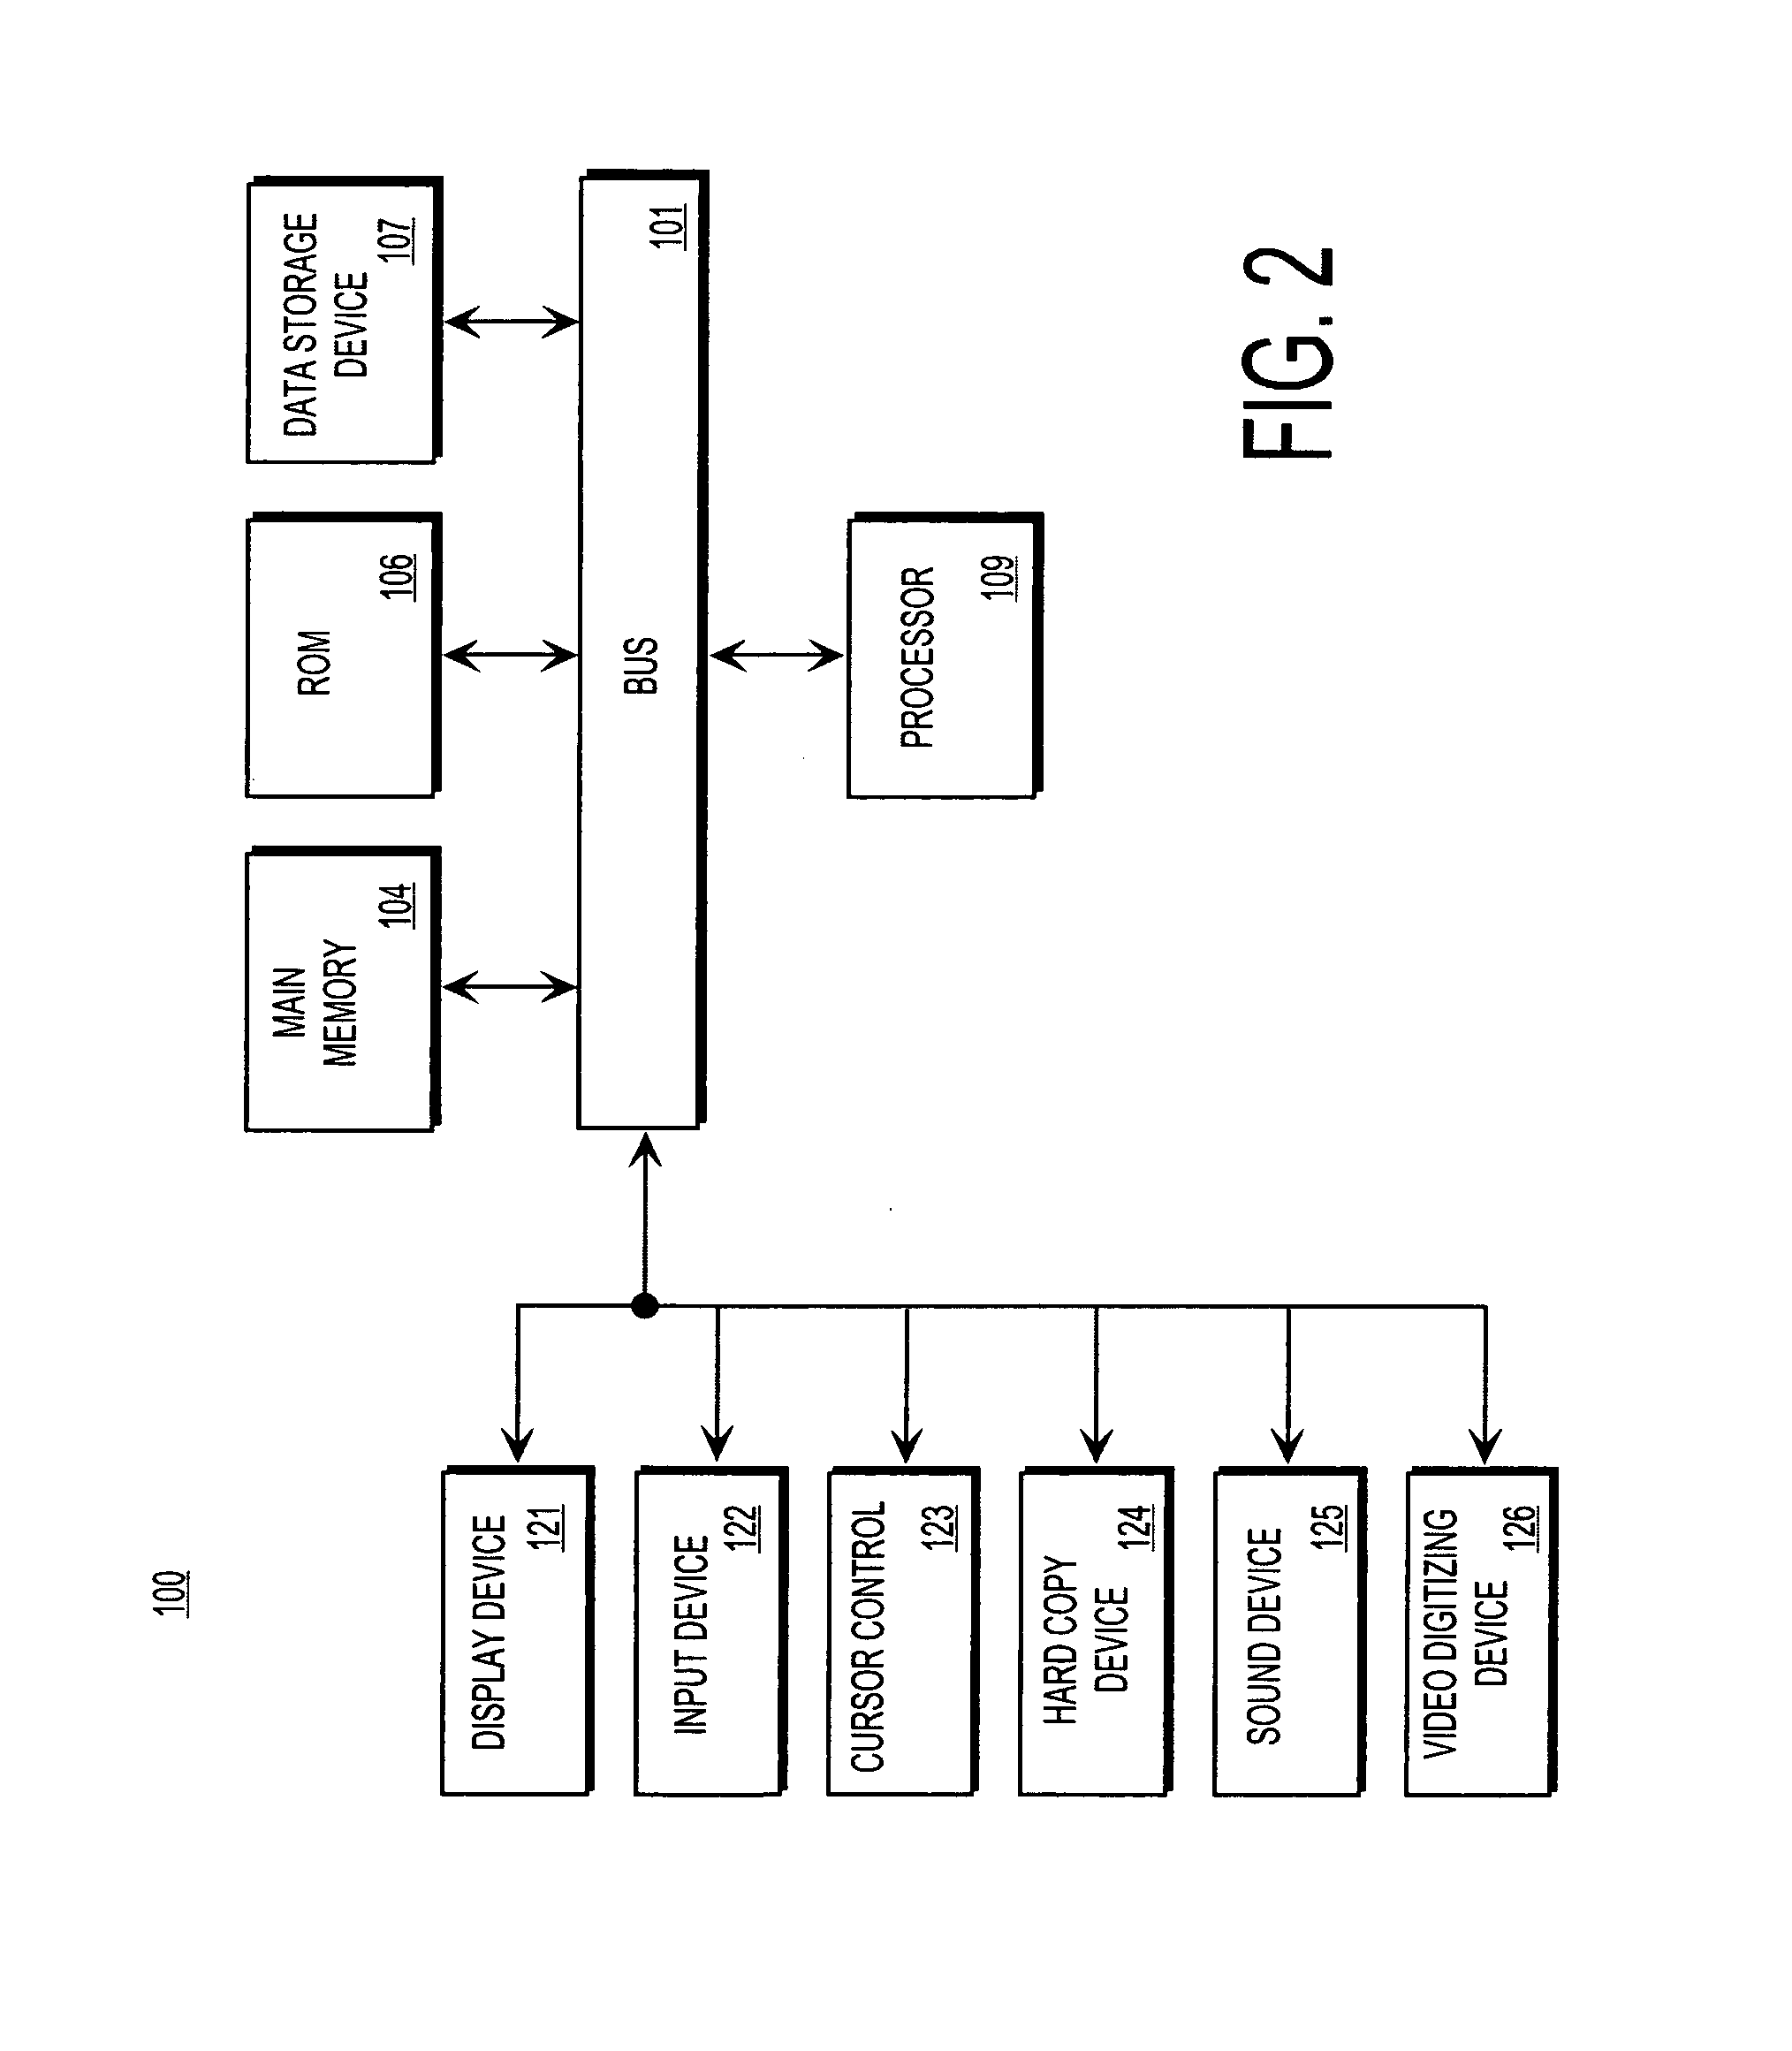 Method and apparatus for network-based sales force management